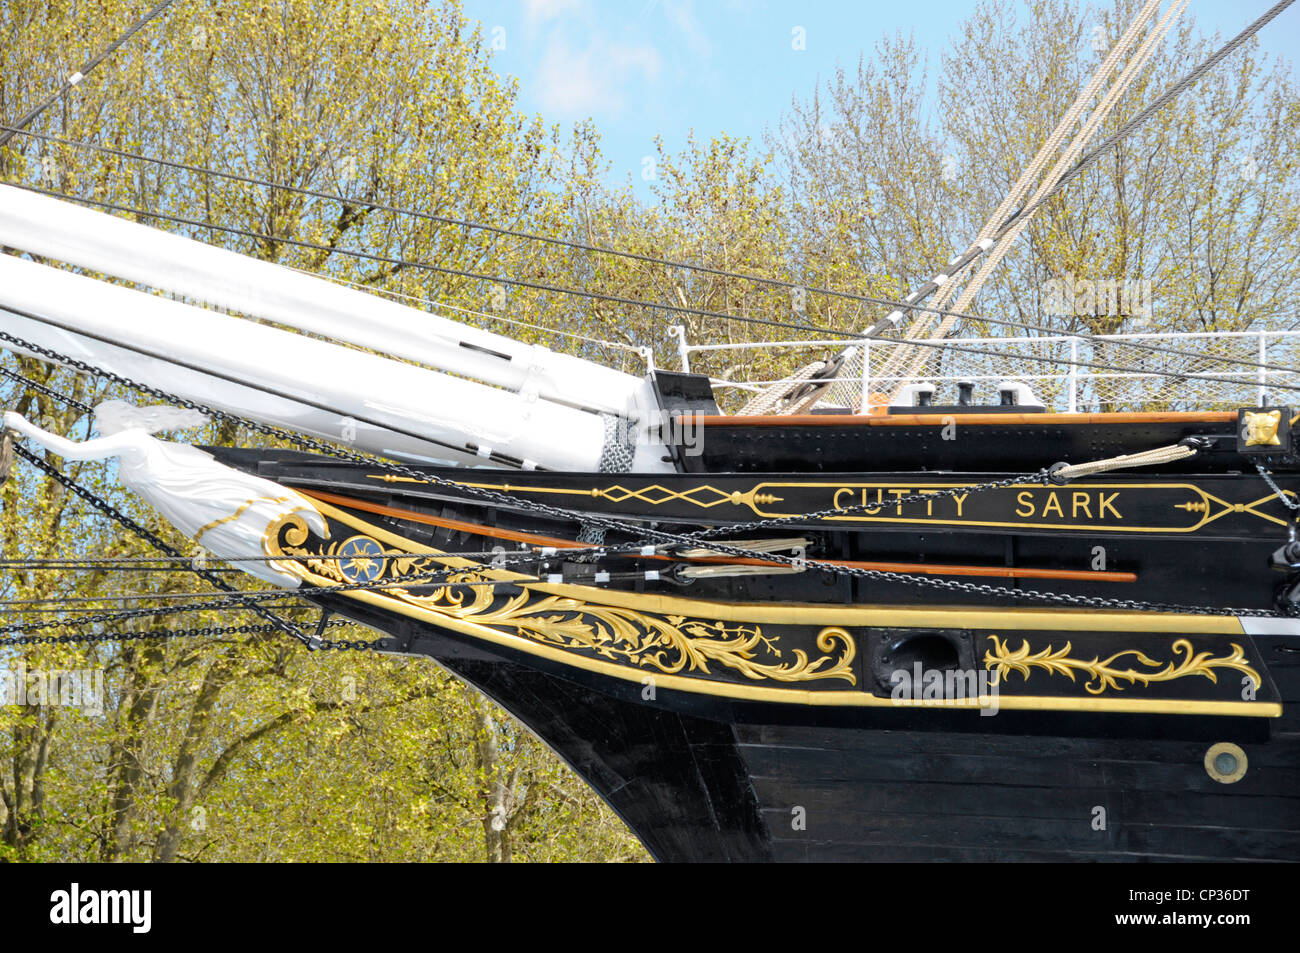 Cutty Sark clipper ship close up of bow detailing Stock Photo